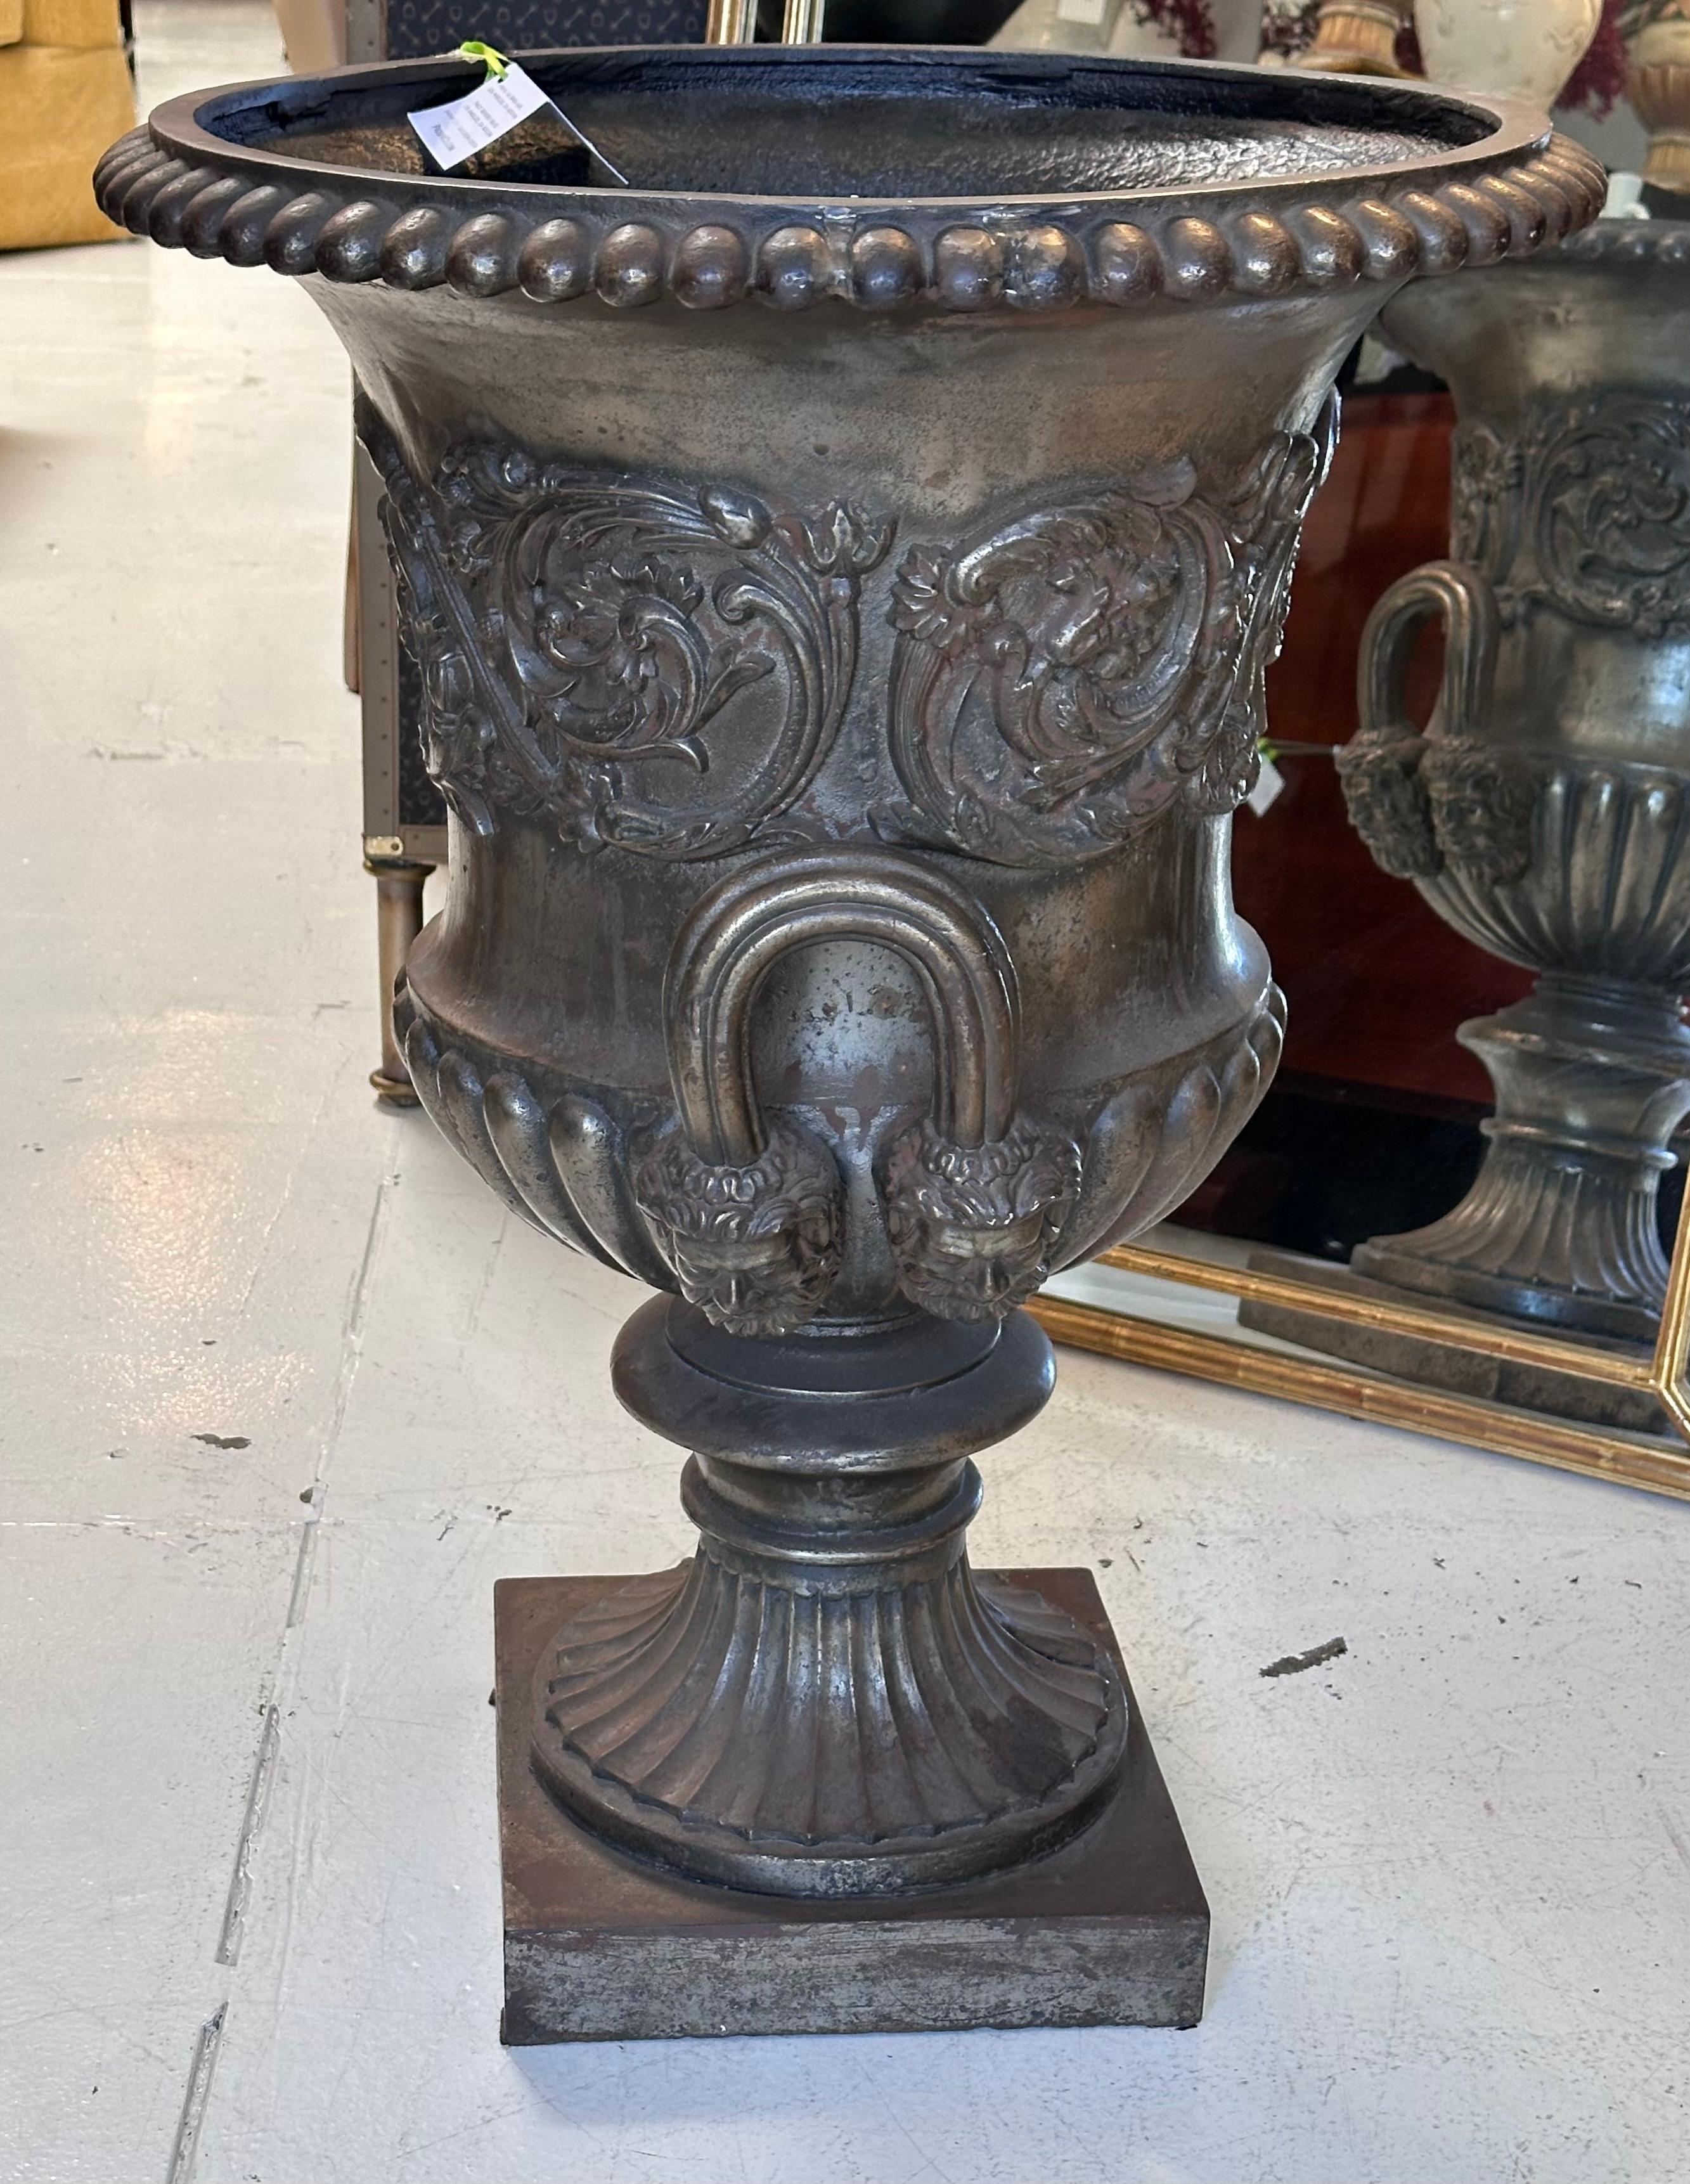 Huge Antique Silvered Metal Campaigns Urn Planter - Barbara Lockhart Estate In Good Condition For Sale In LOS ANGELES, CA